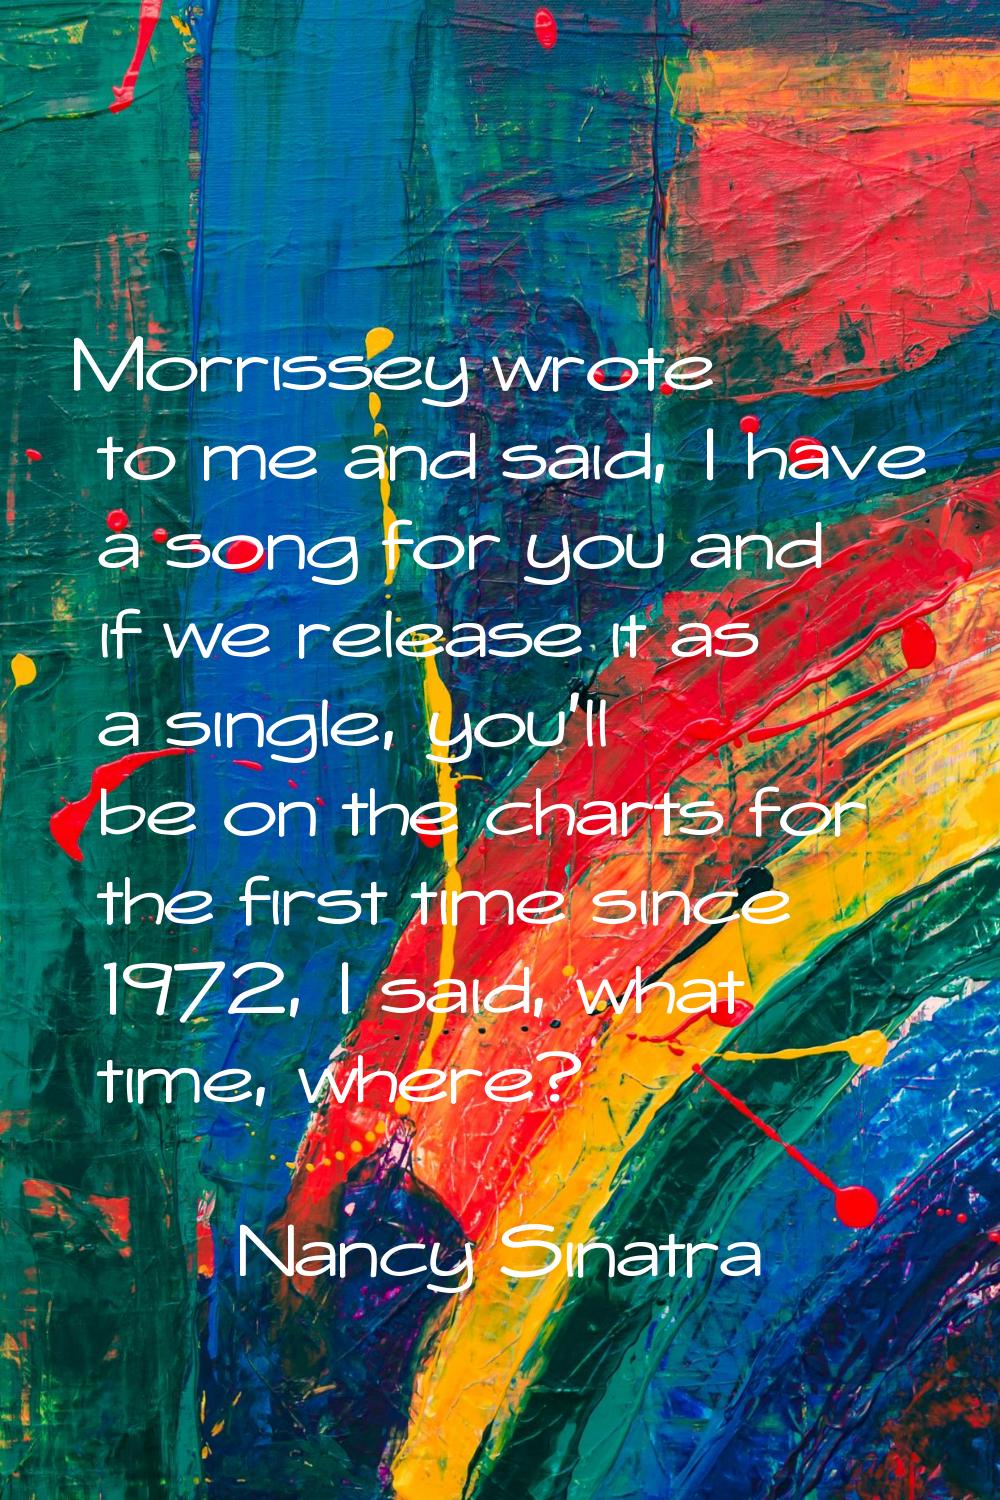 Morrissey wrote to me and said, I have a song for you and if we release it as a single, you'll be o